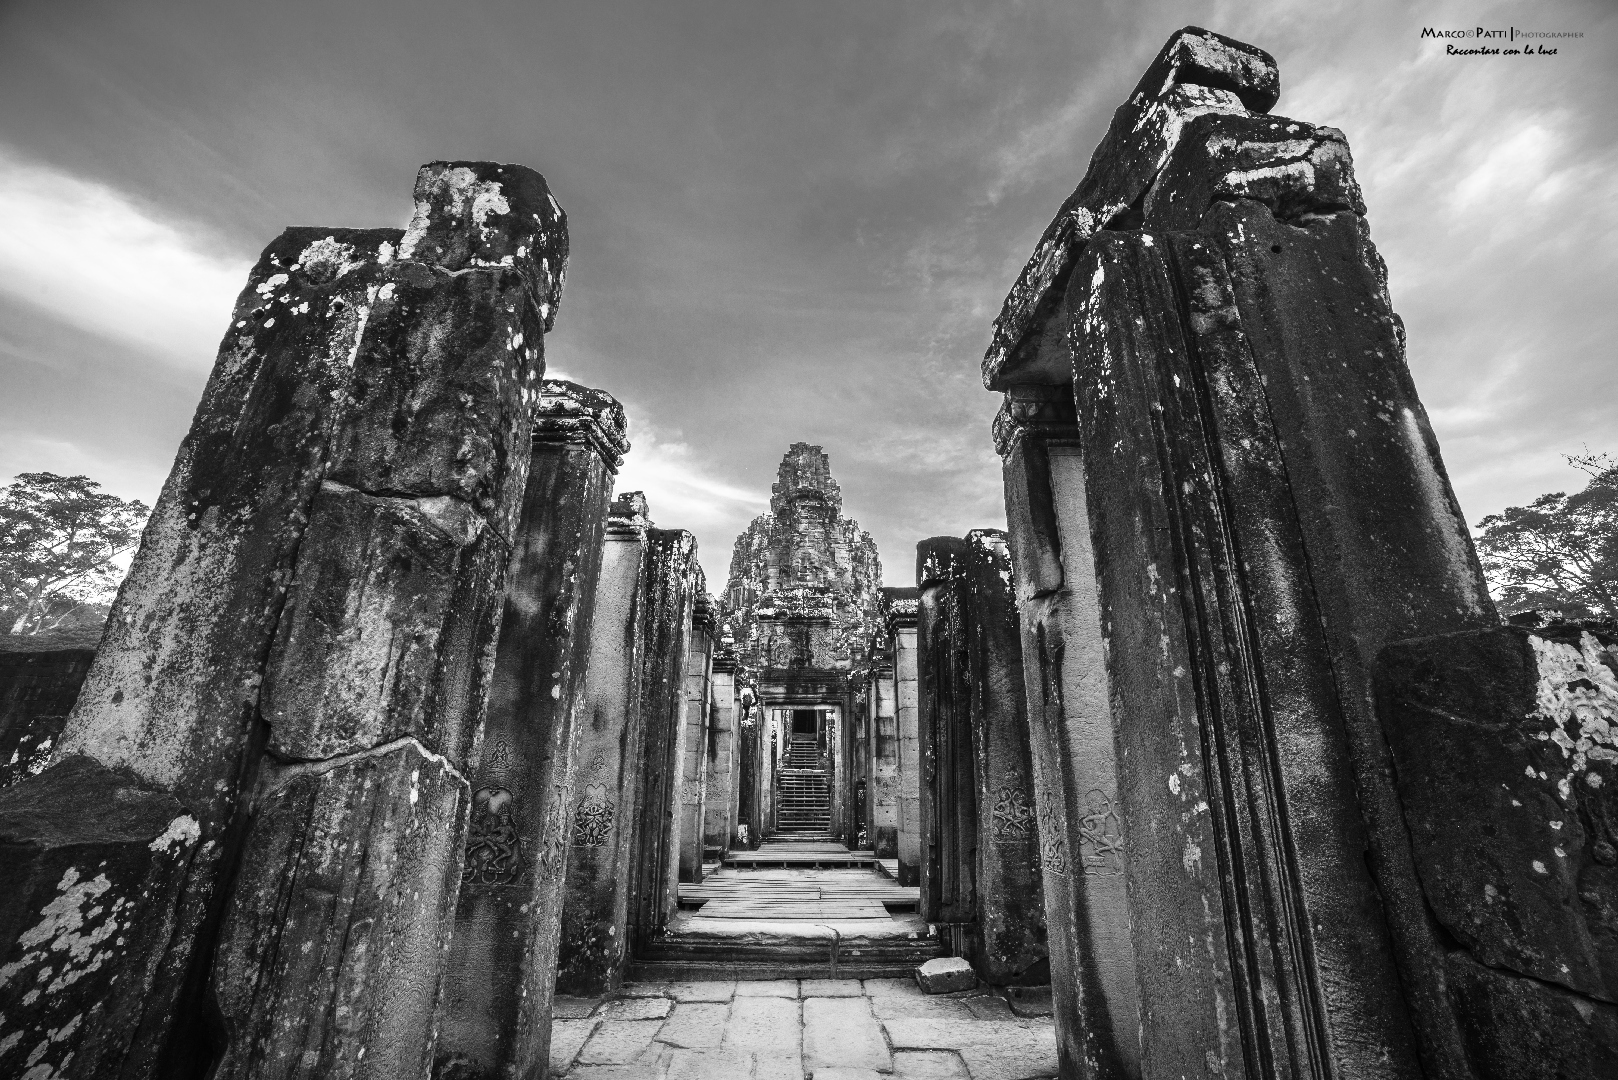 the doors of the Bayon...